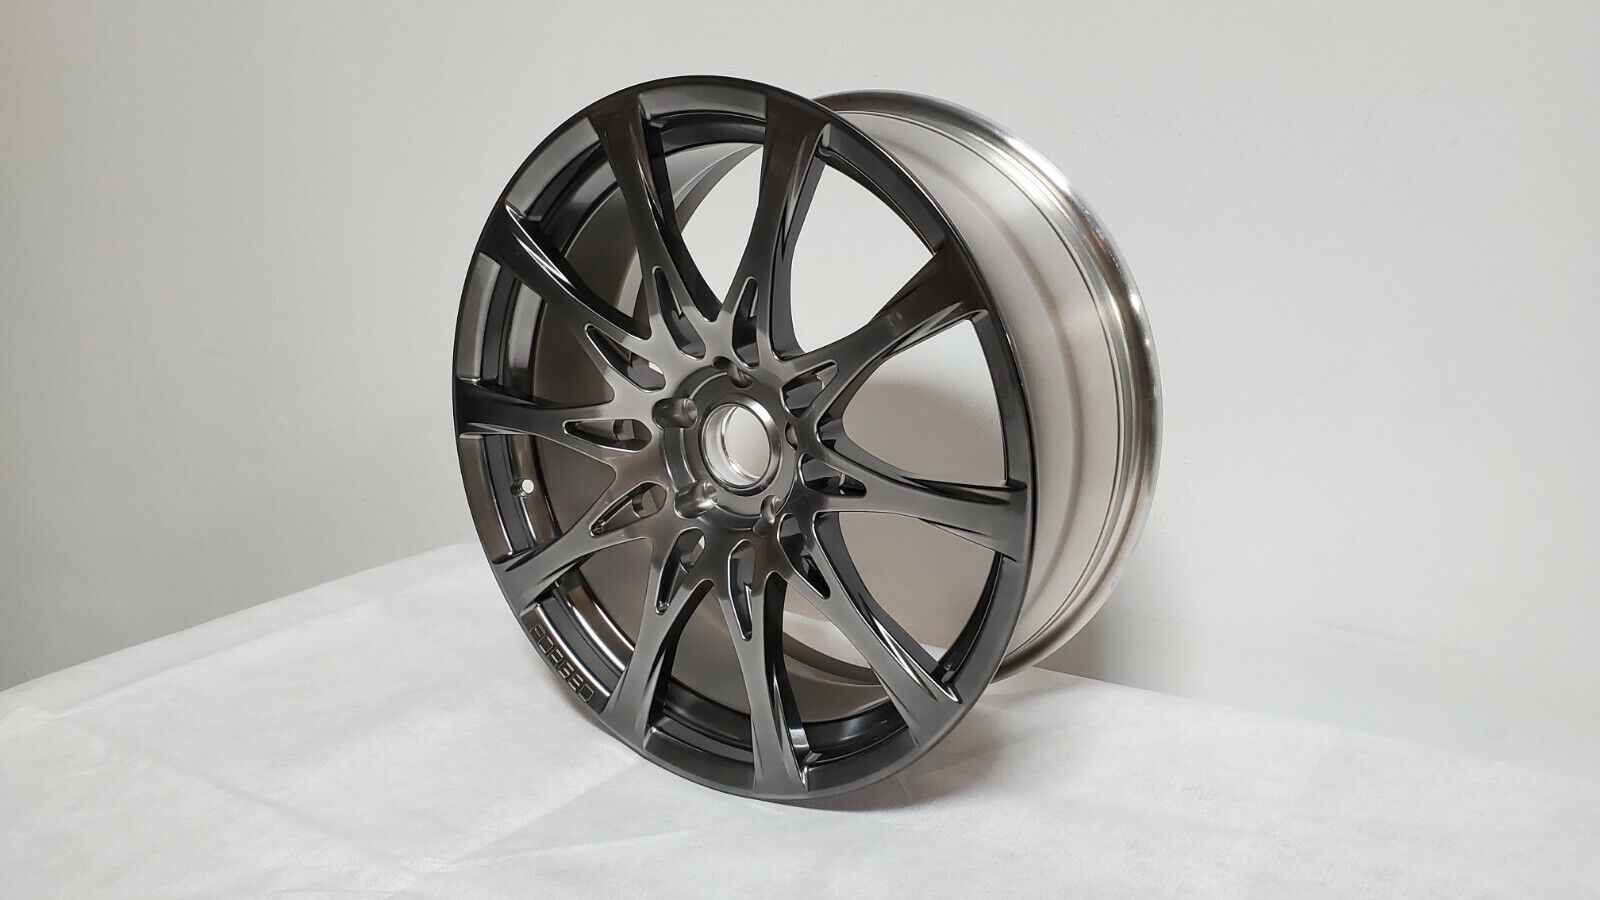 PTR45-30130 Wheel With F-SPORT Center Cap (Must Be A Minimum Order Of 4 Wheels)